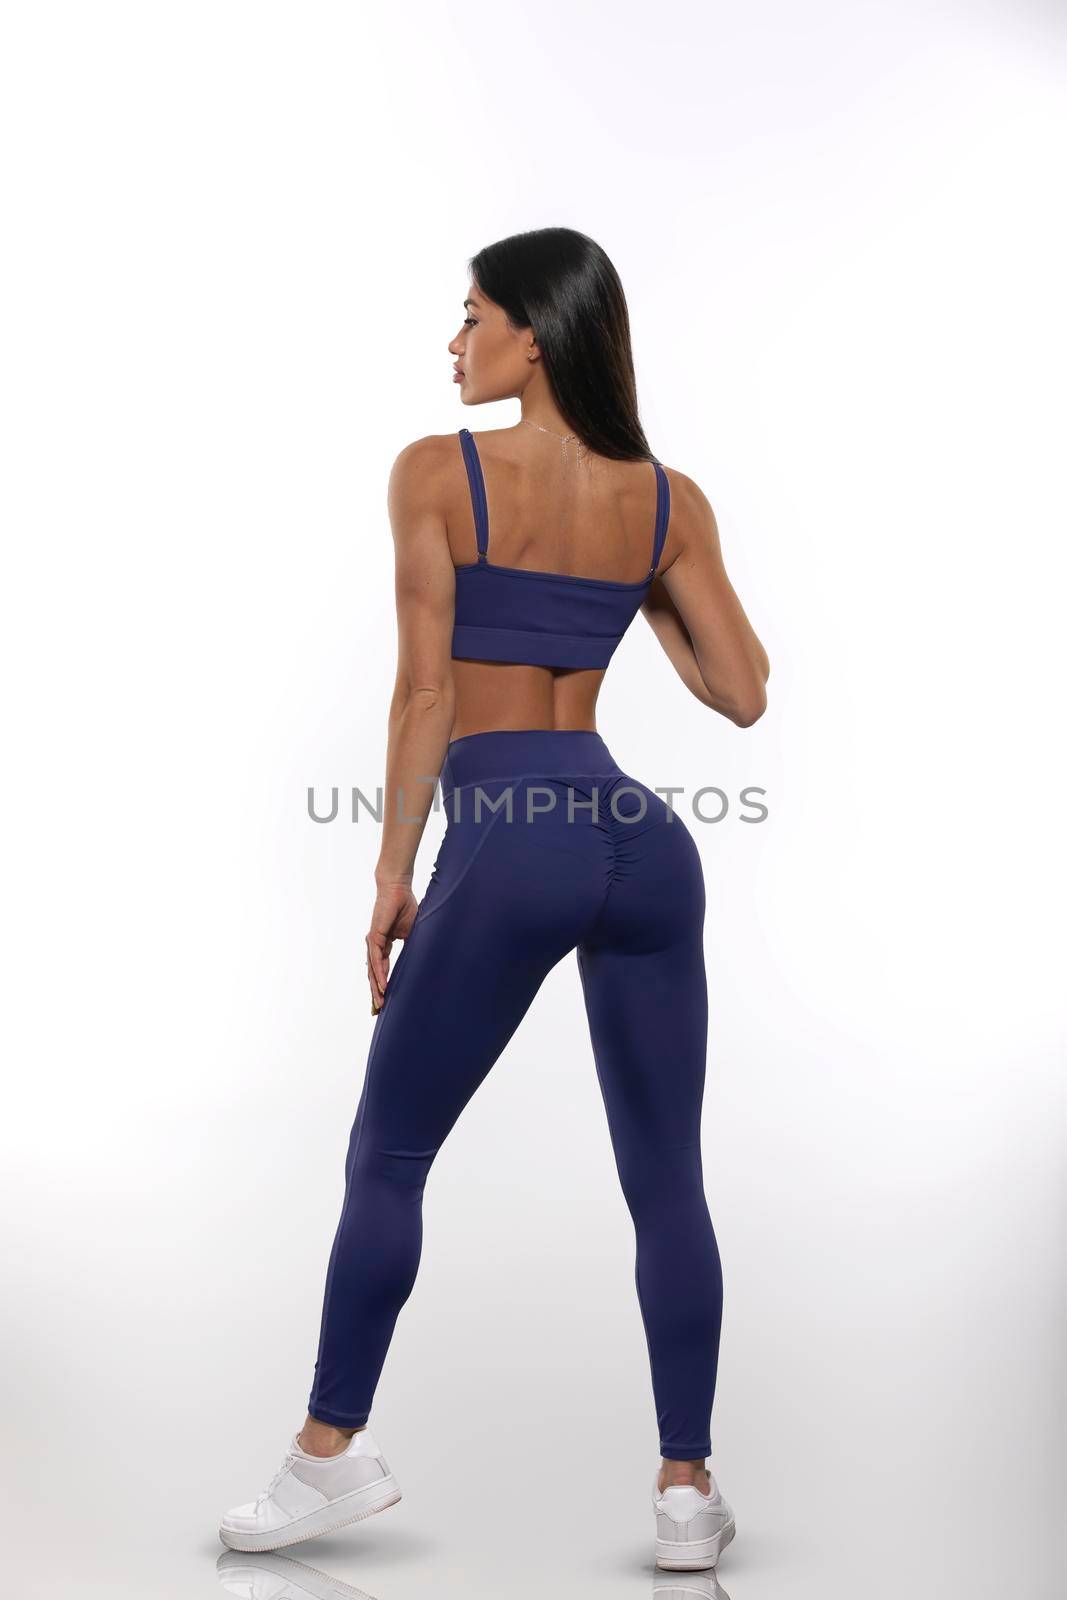 brunette girl in blue leggings and top stay back on a white background